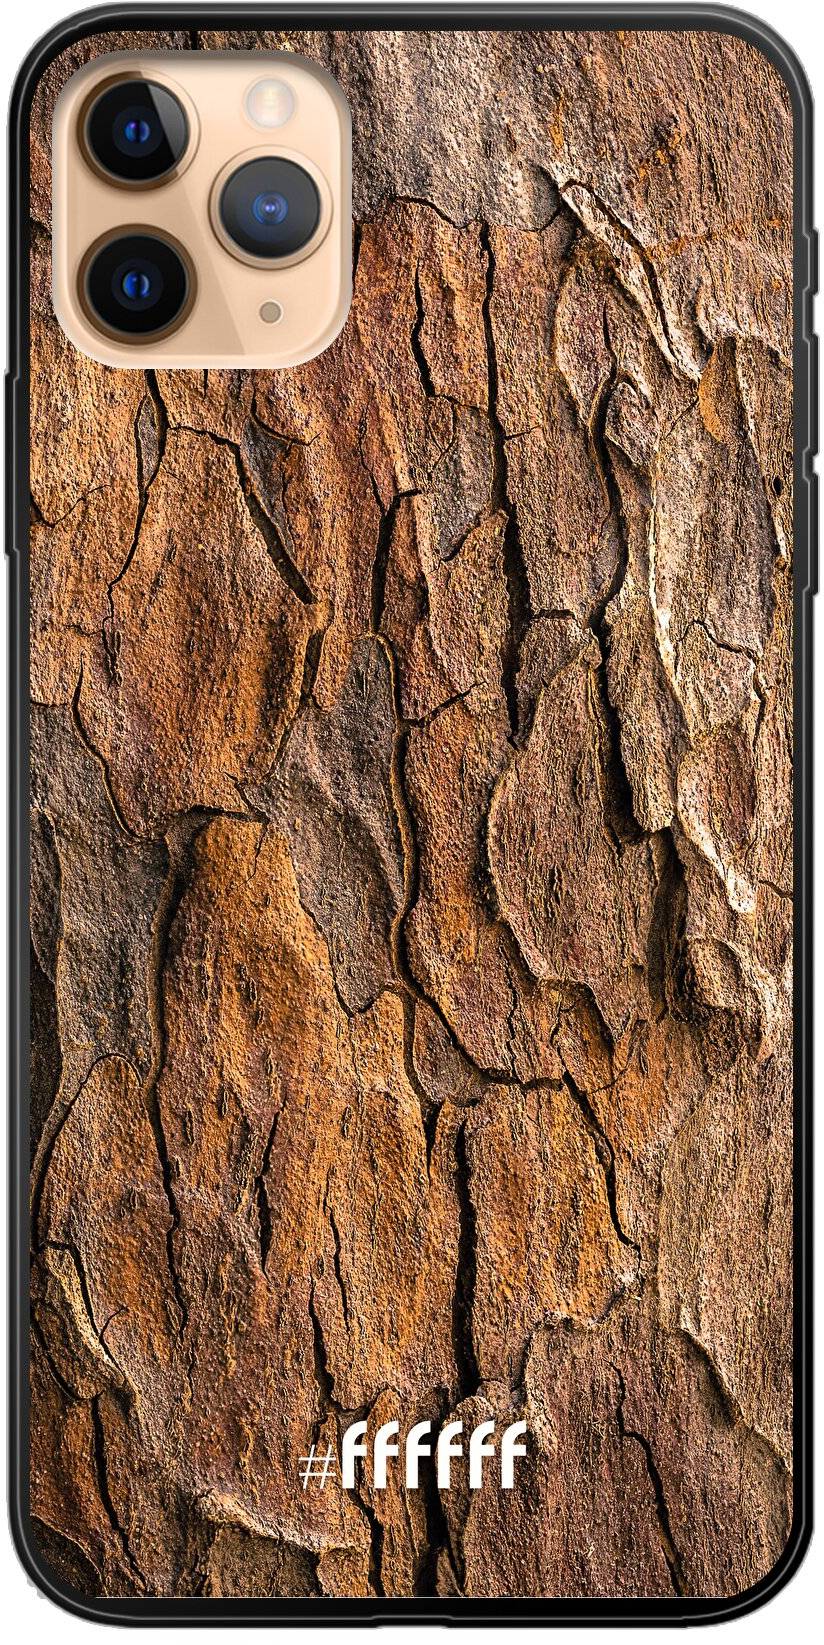 Woody iPhone 11 Pro Max